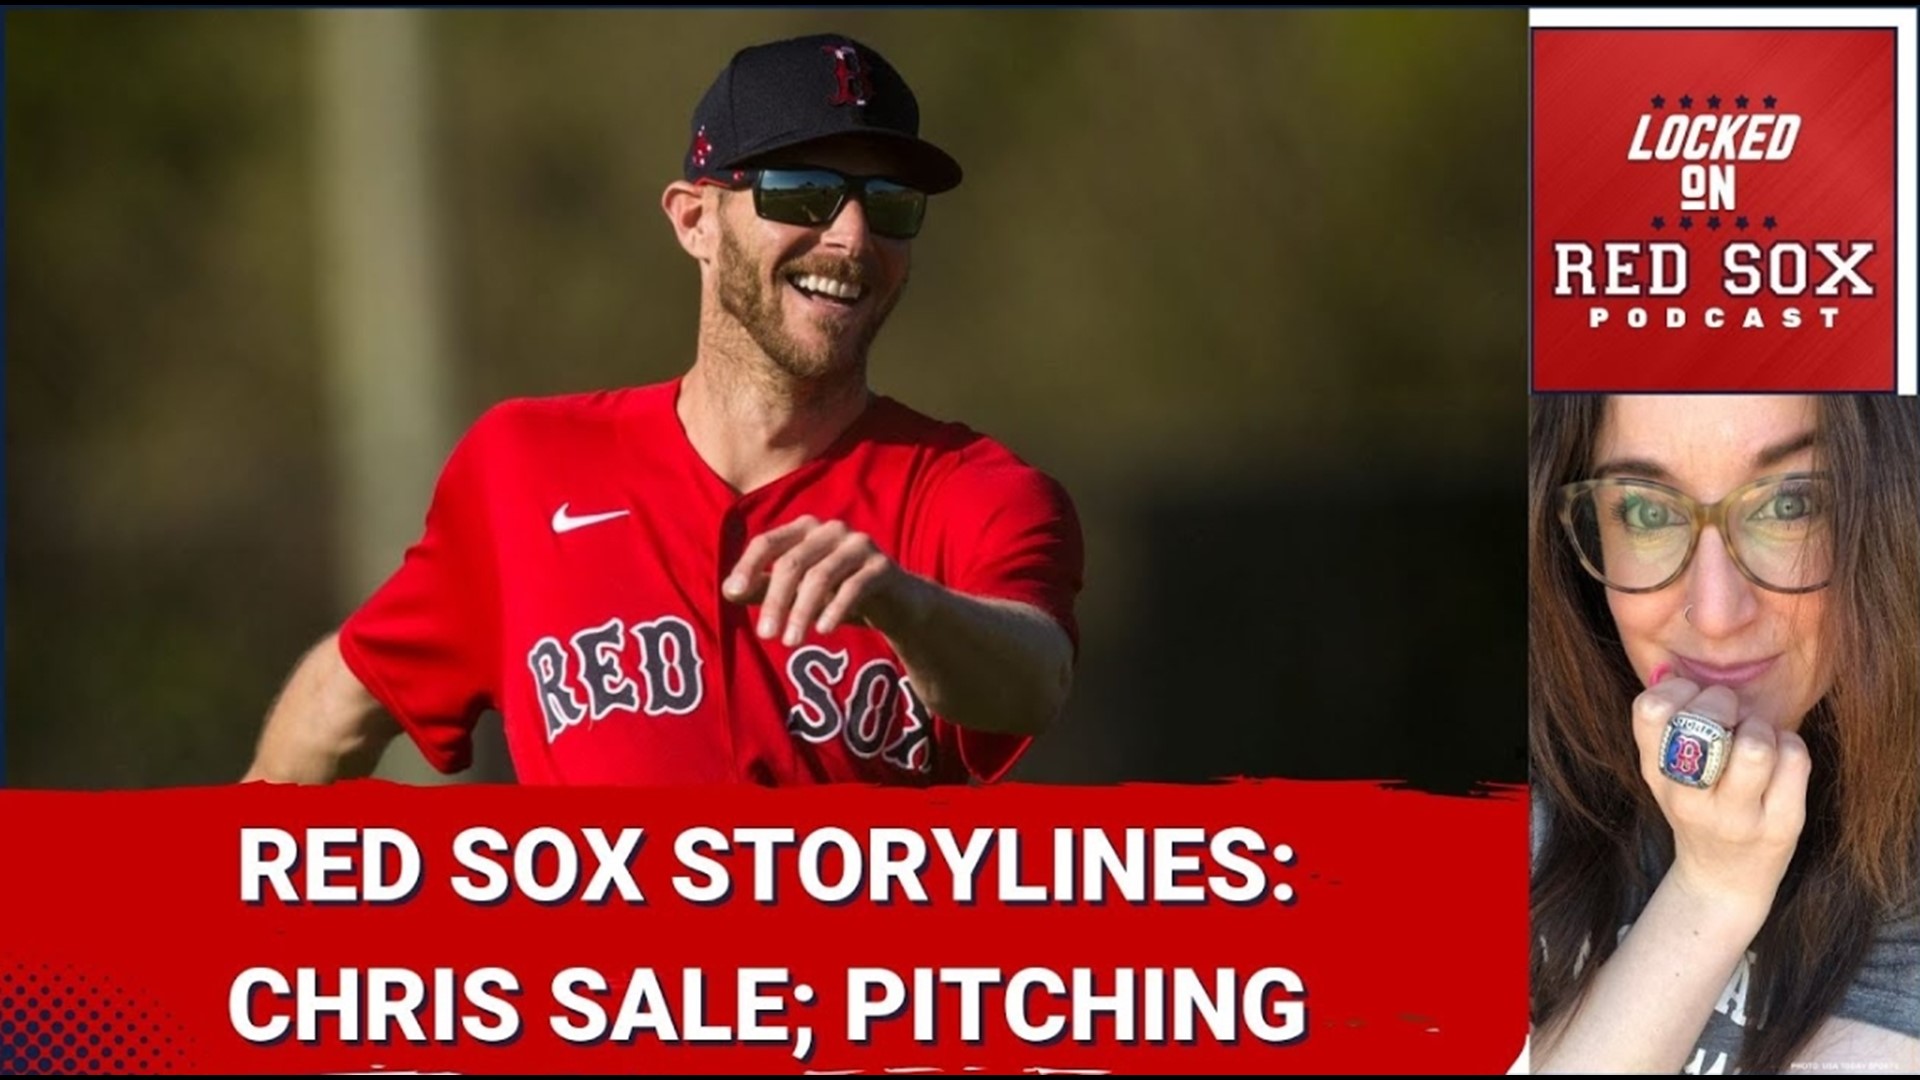 Sale, Red Sox cruise past Orioles – Sentinel and Enterprise